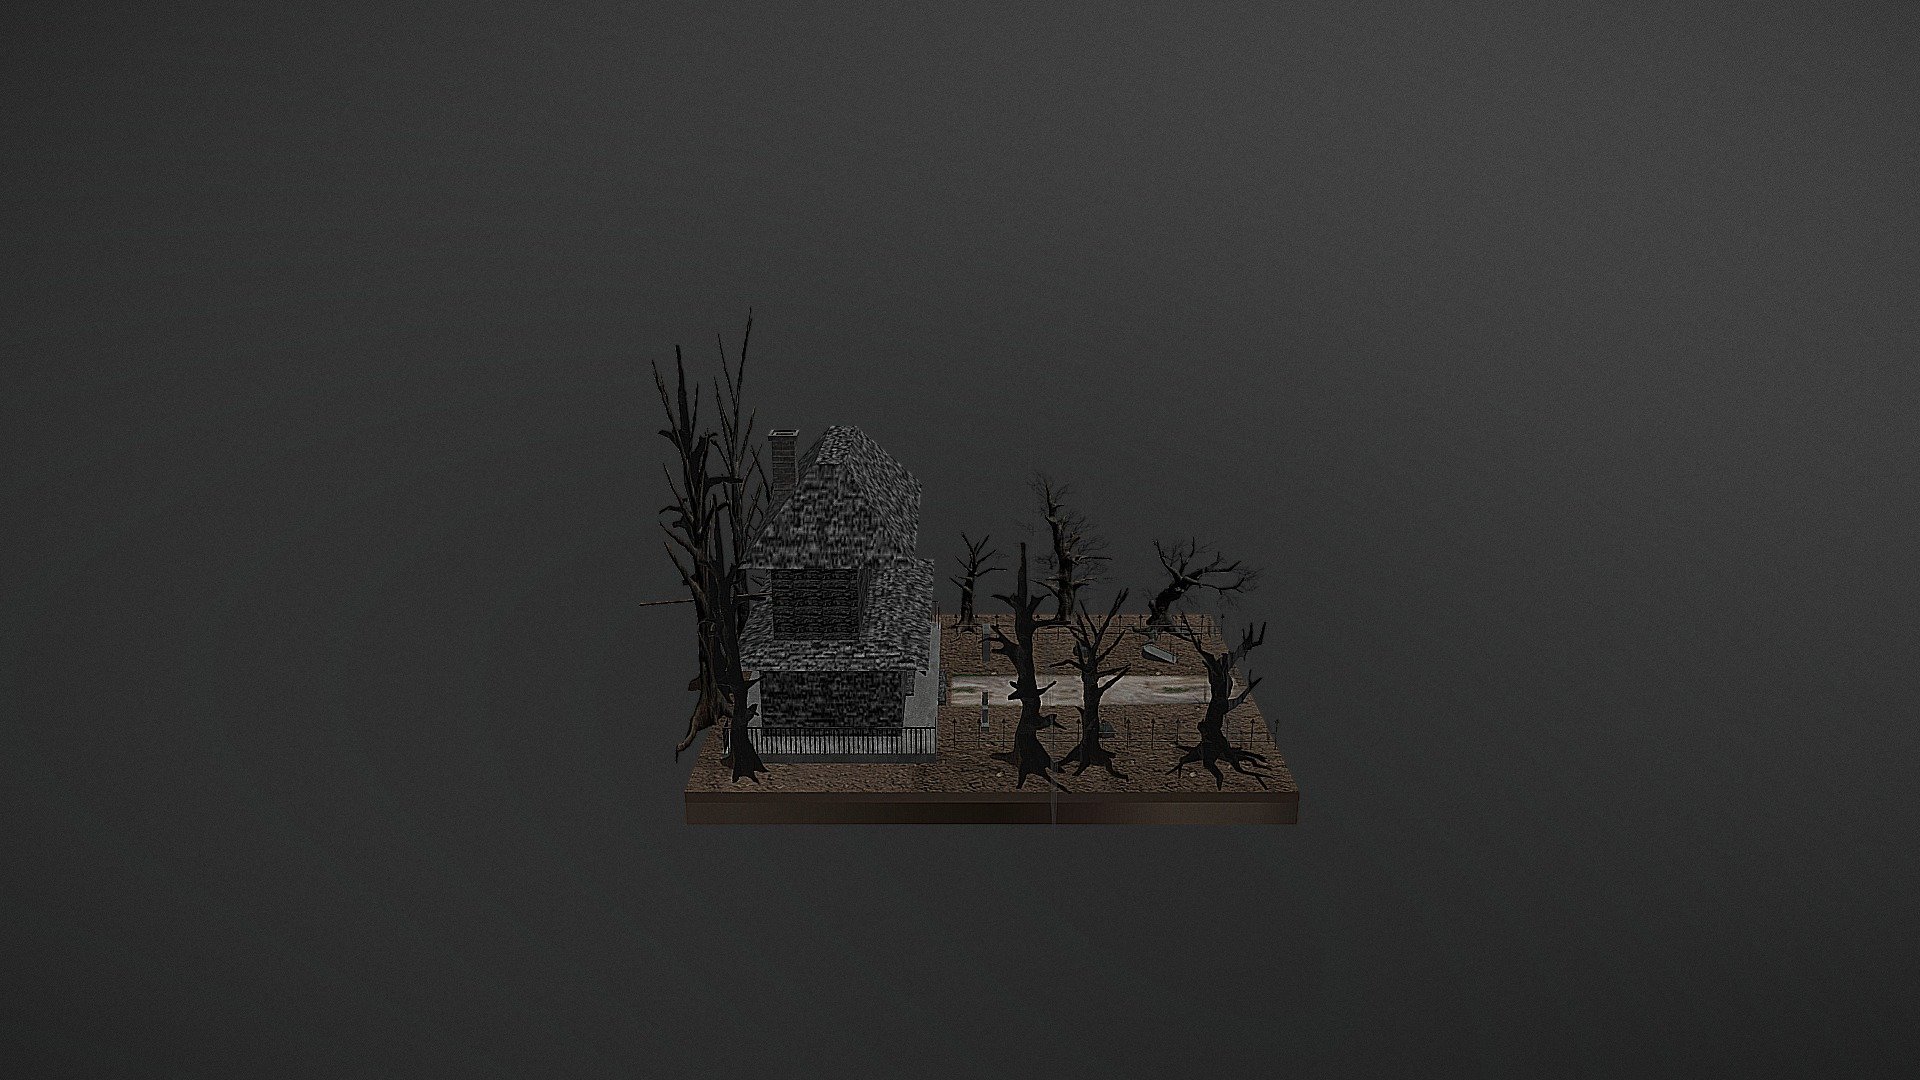 Haunted House download the last version for ios